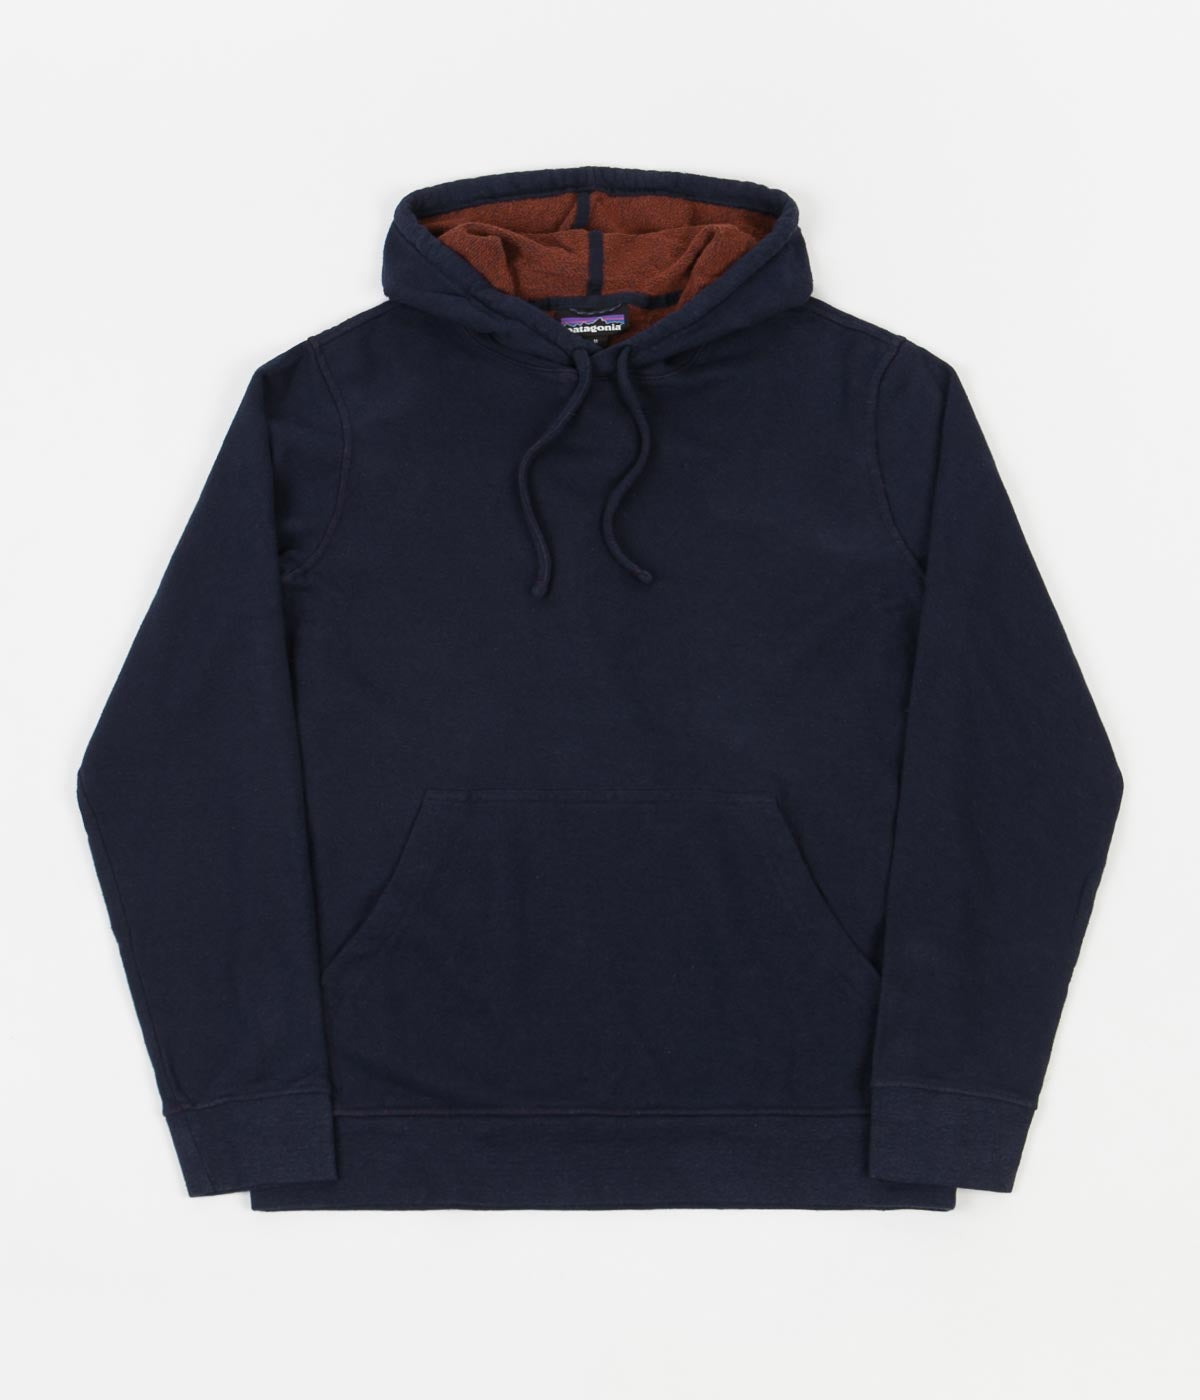 https://cdn.shopify.com/s/files/1/1202/6102/products/patagonia-trail-harbor-hoodie-new-navy-1.jpg